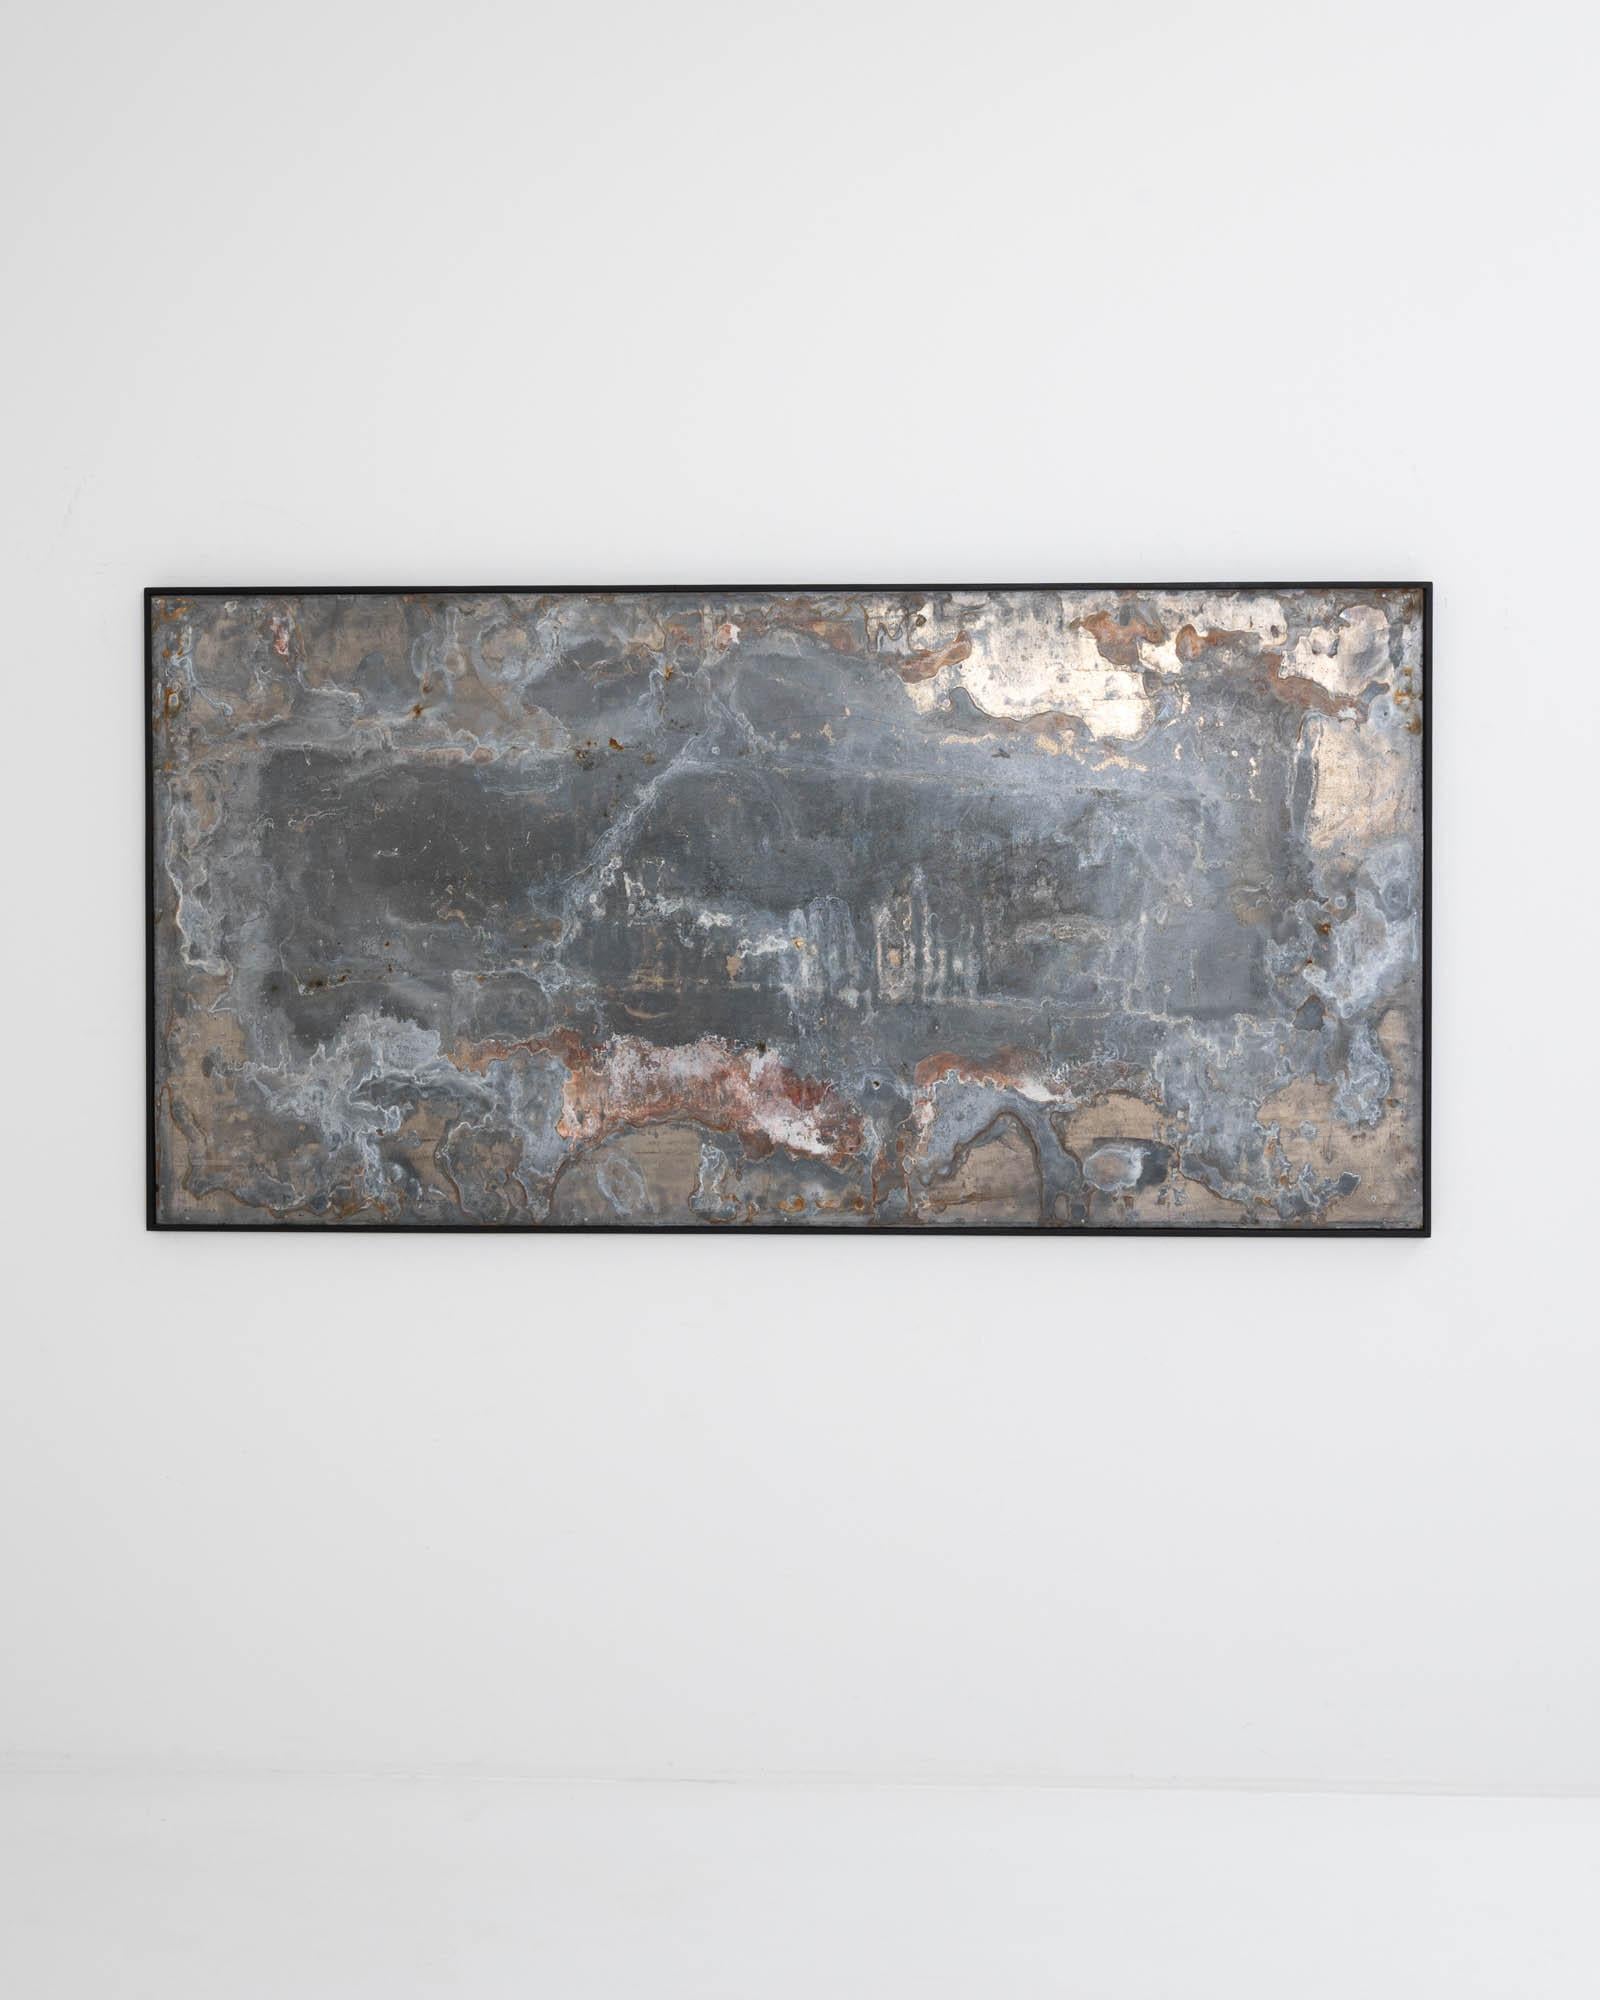 Bold and enigmatic, this large scale abstract artwork combines the hand of man and the hand of nature. The form has a Minimalist simplicity: a broad sheet of metal is set within a wooden frame. The surface of the metal combines human